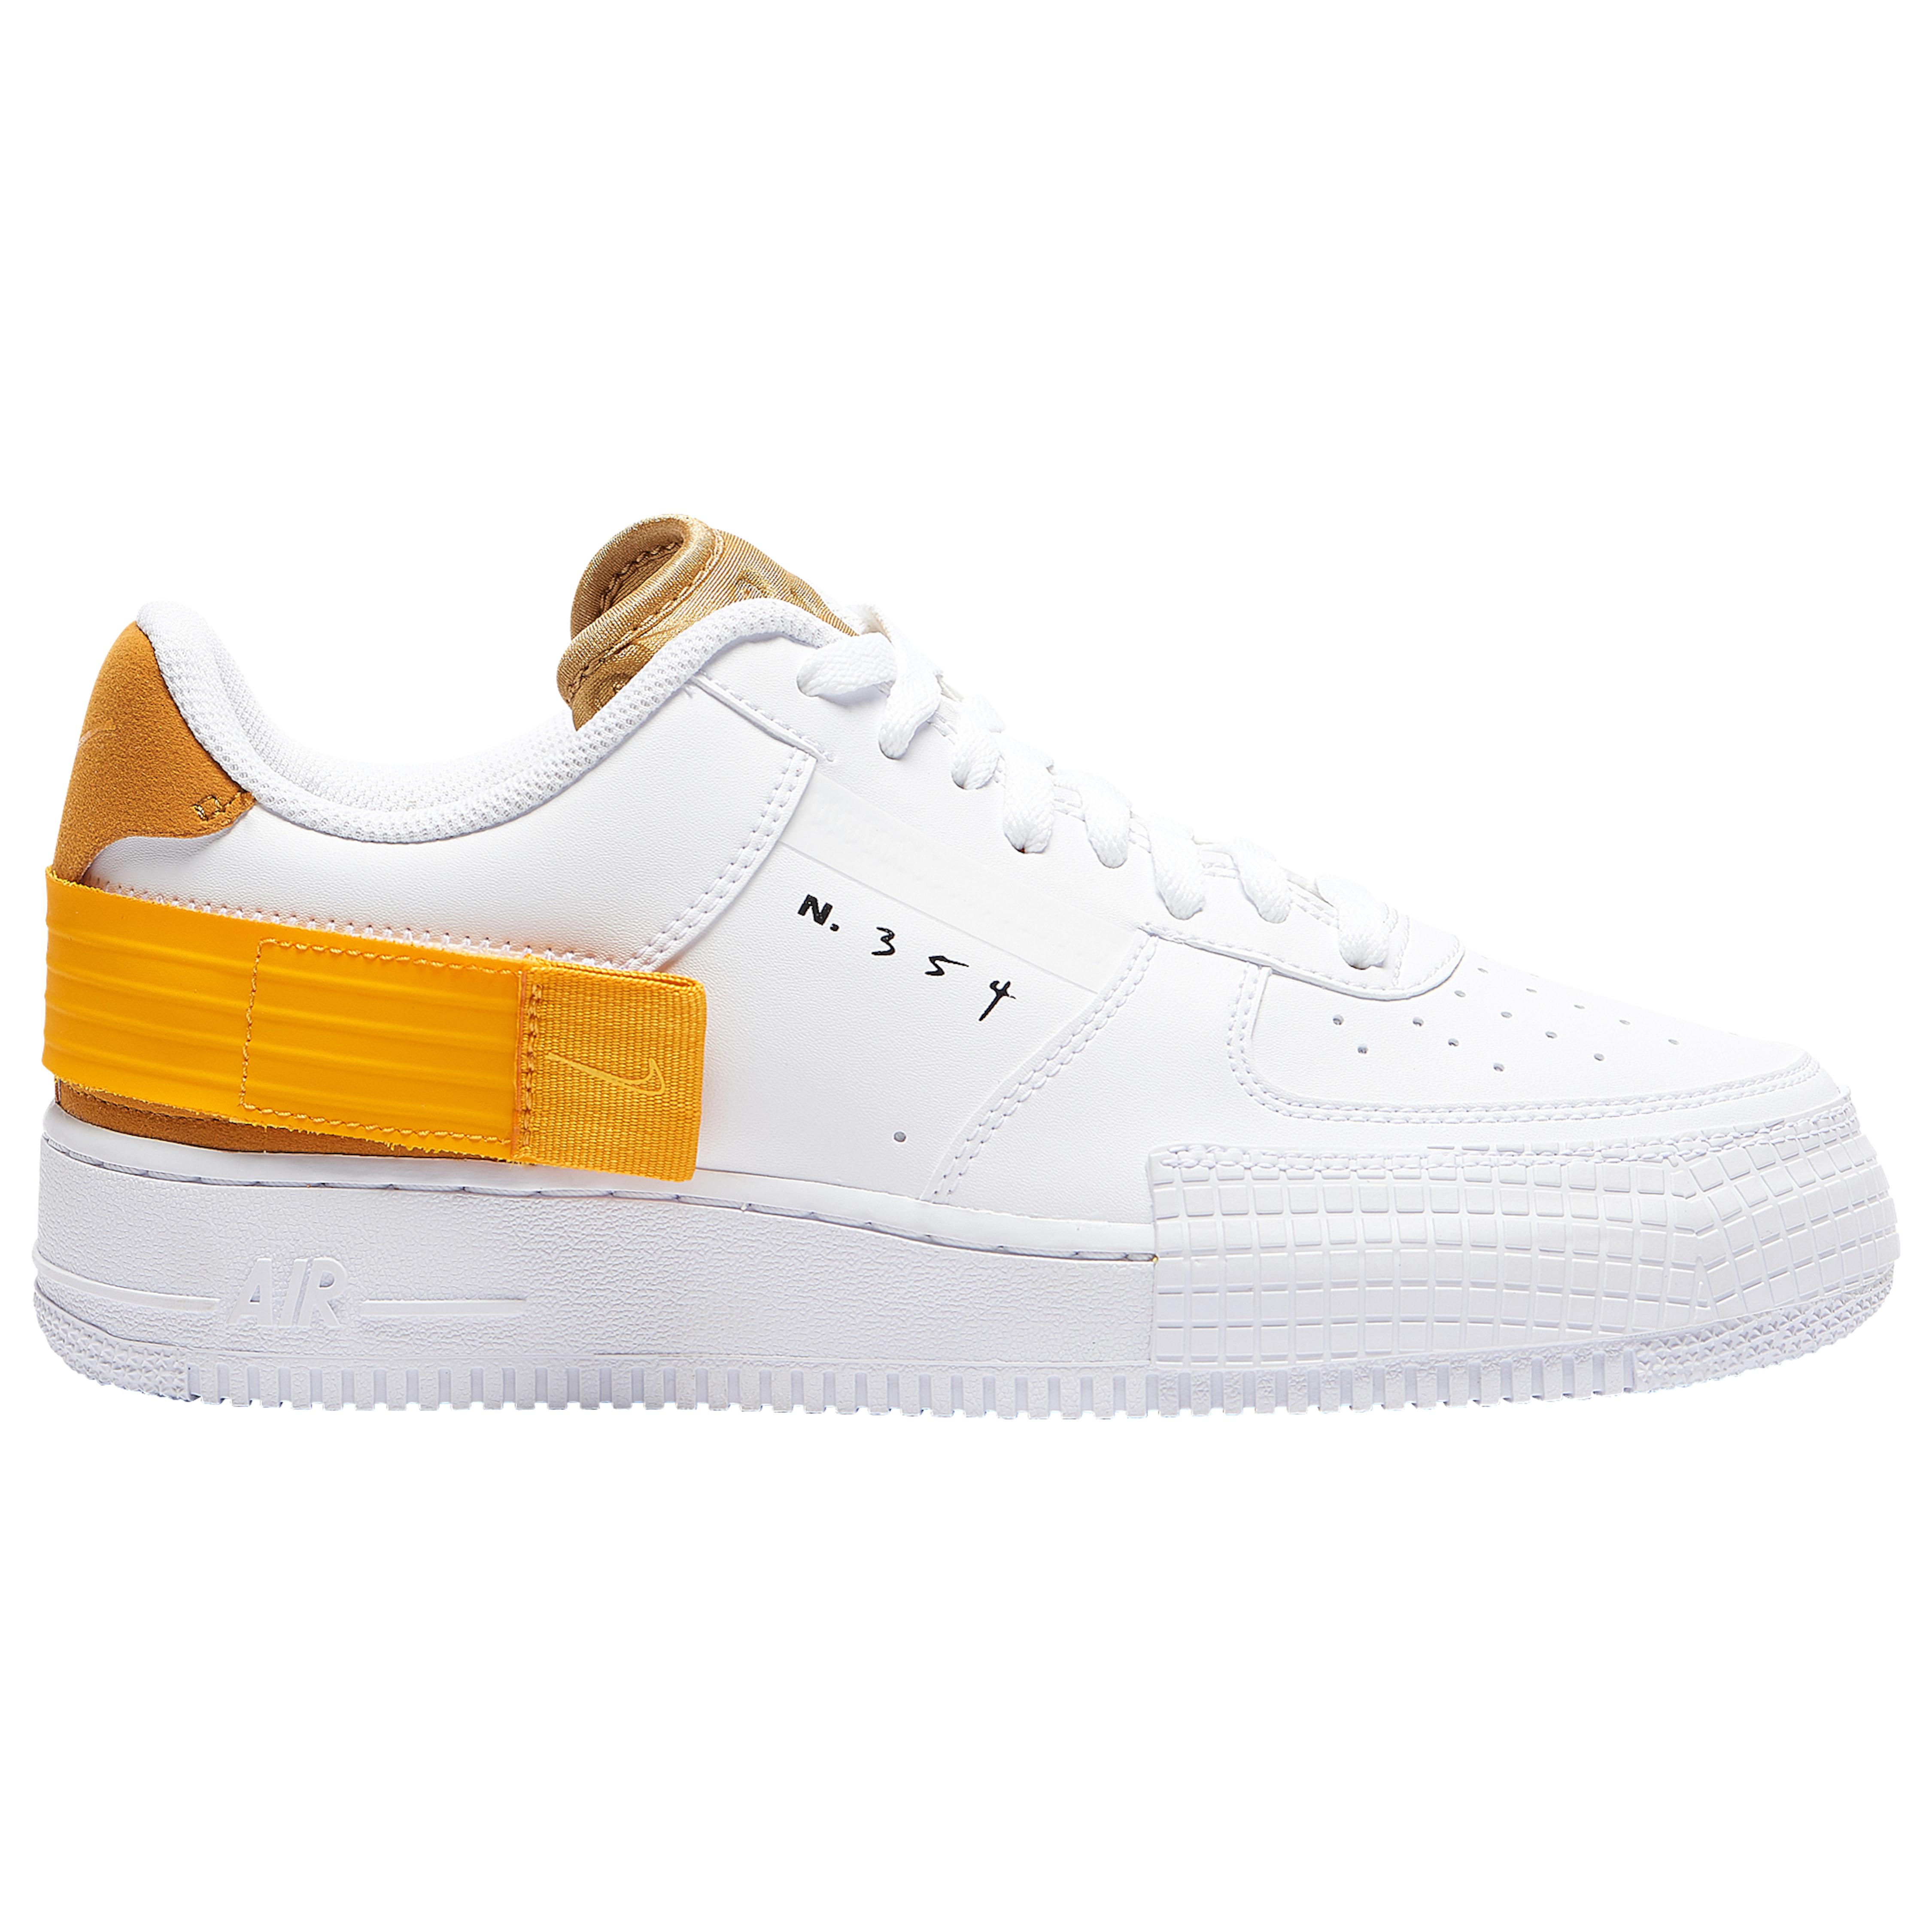 Nike Synthetic Air Force 1 Lo Type Casual Basketball Shoes in White /  University Gold Black (White) for Men - Save 53% - Lyst